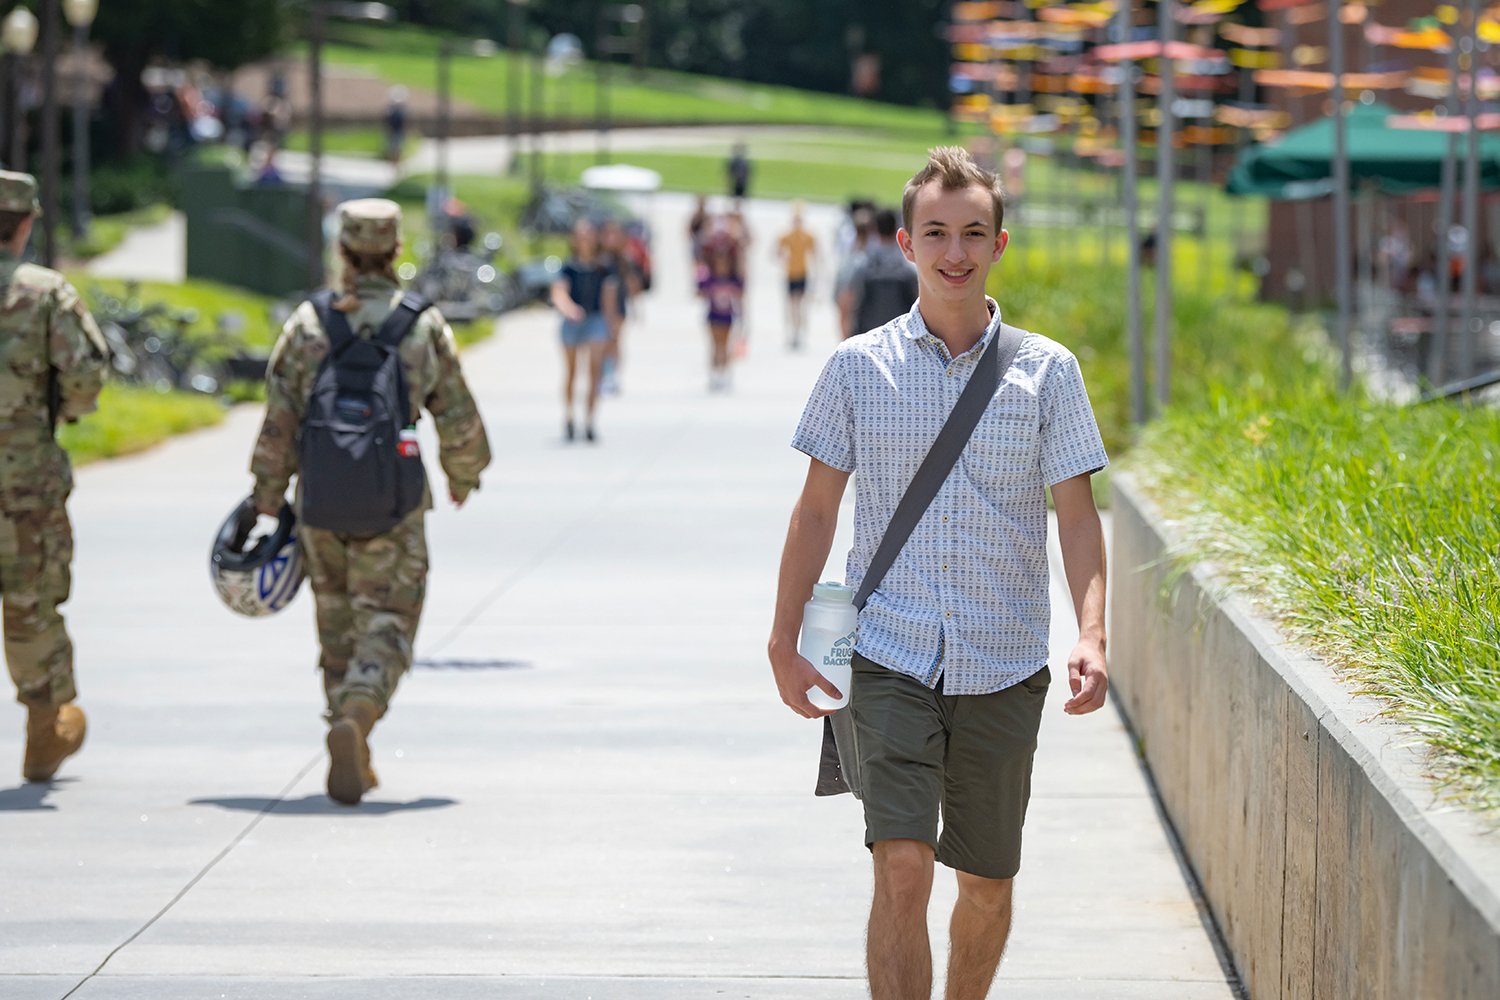 Student walking near the Clemson Honors Center on campus.